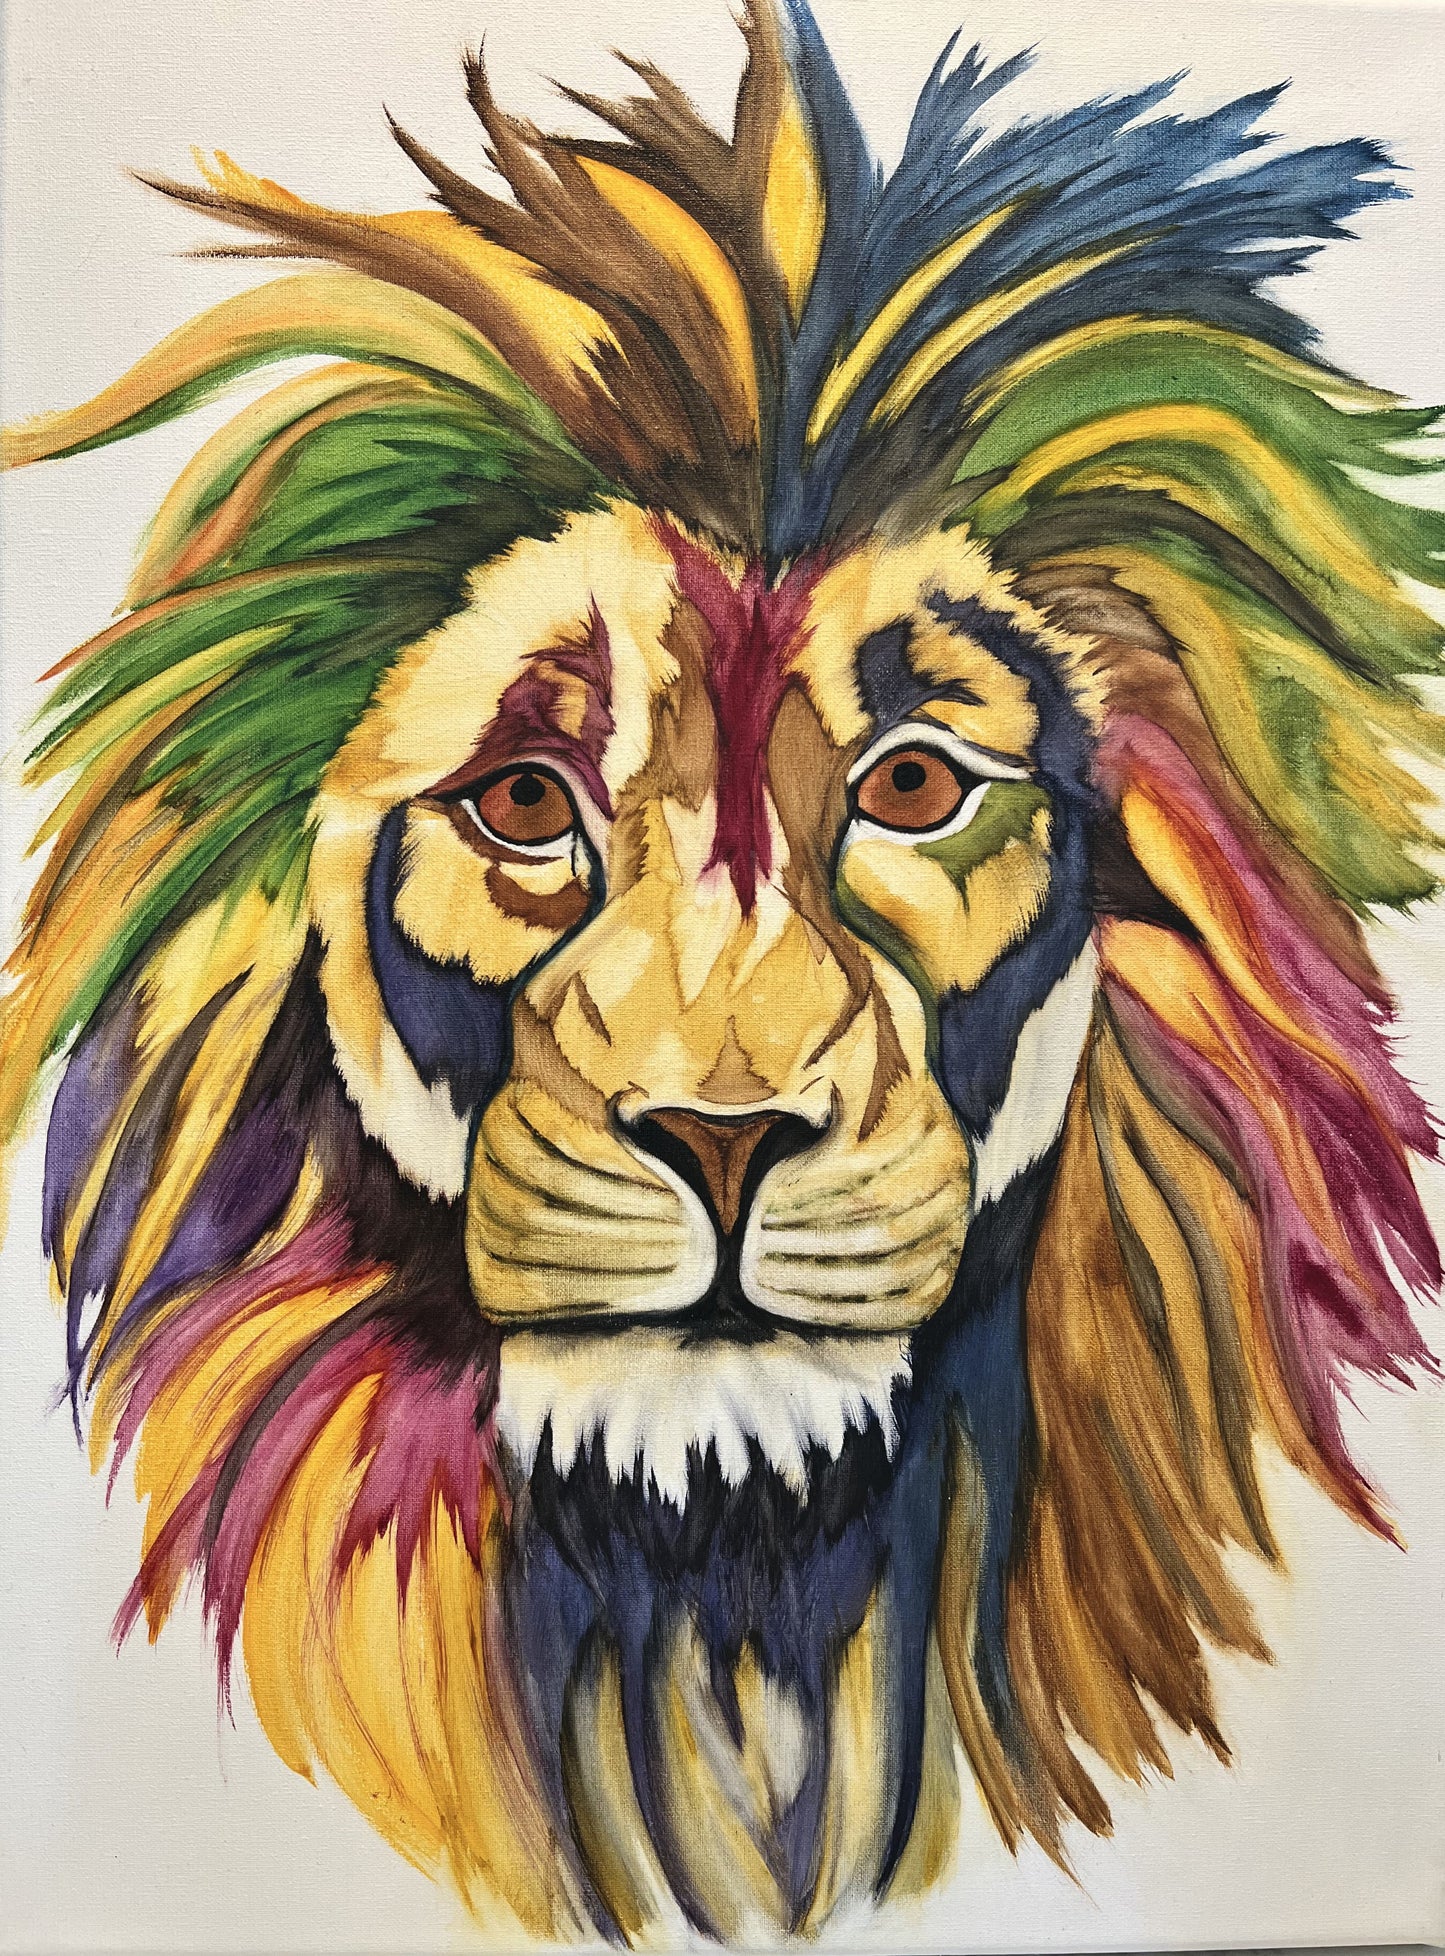 very colorful lion head. all colors of the rainbow in the wild mane of the lion.